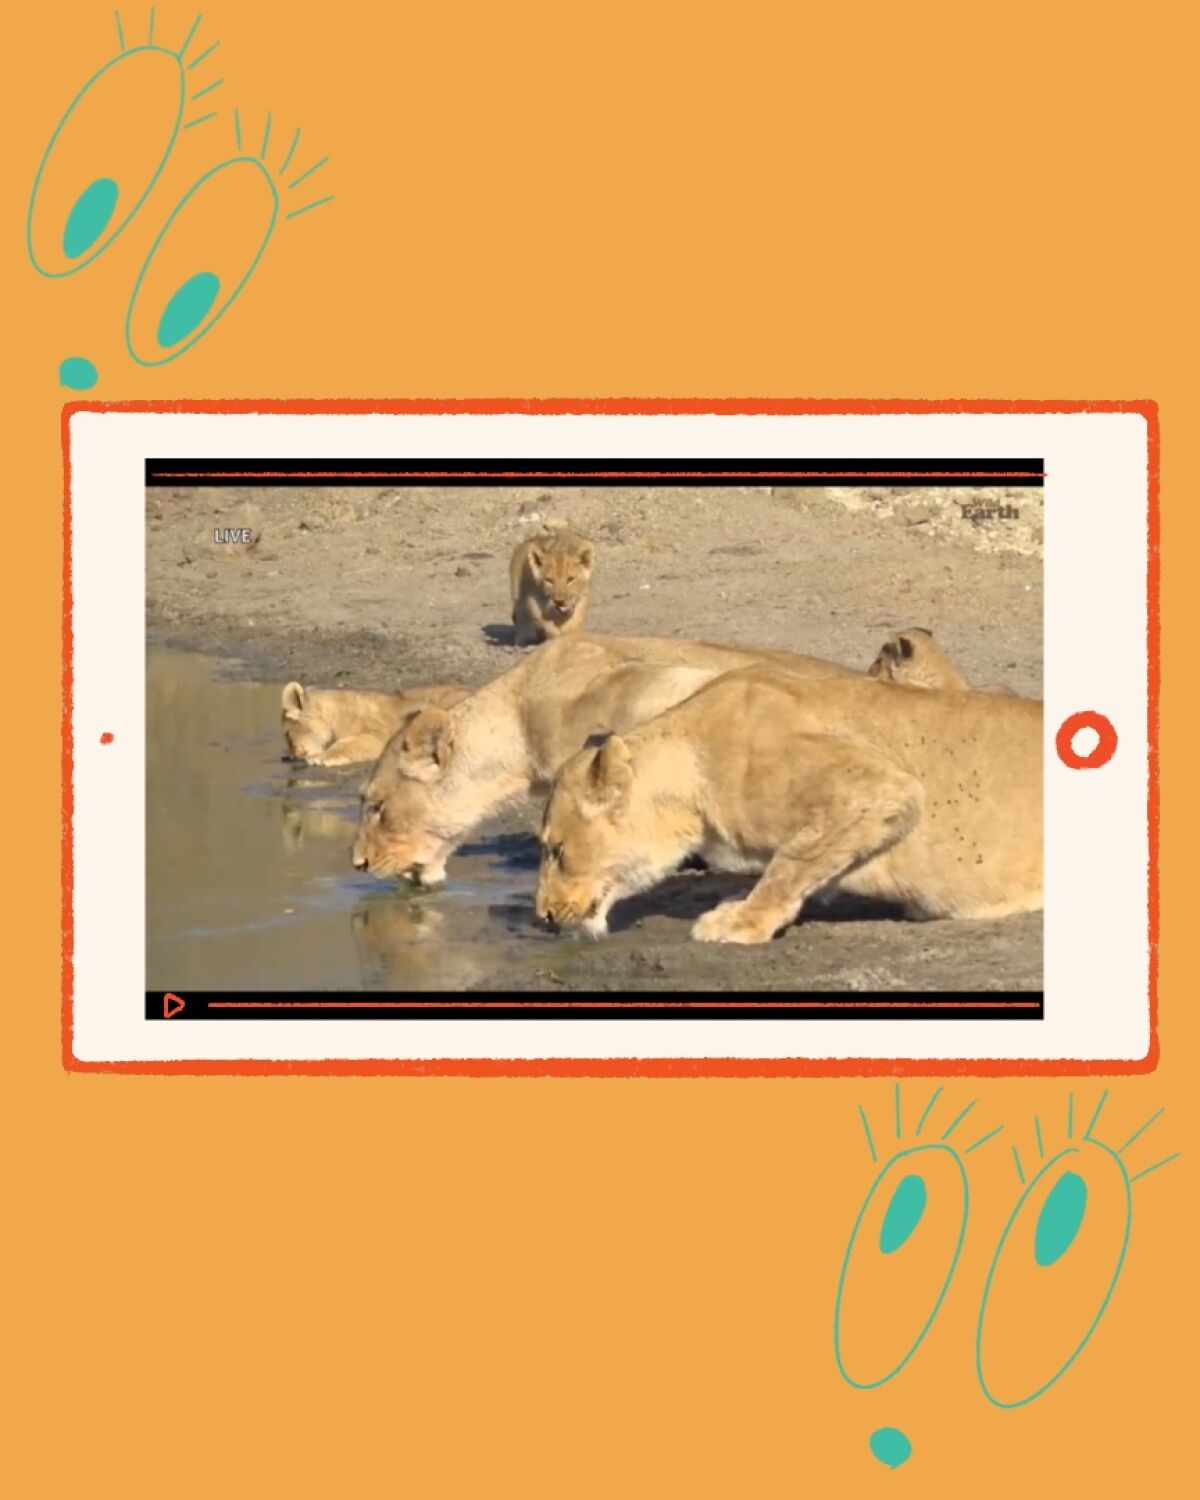 SafariLIVE can take you on an expedition to see these cool cats in their natural habitat.